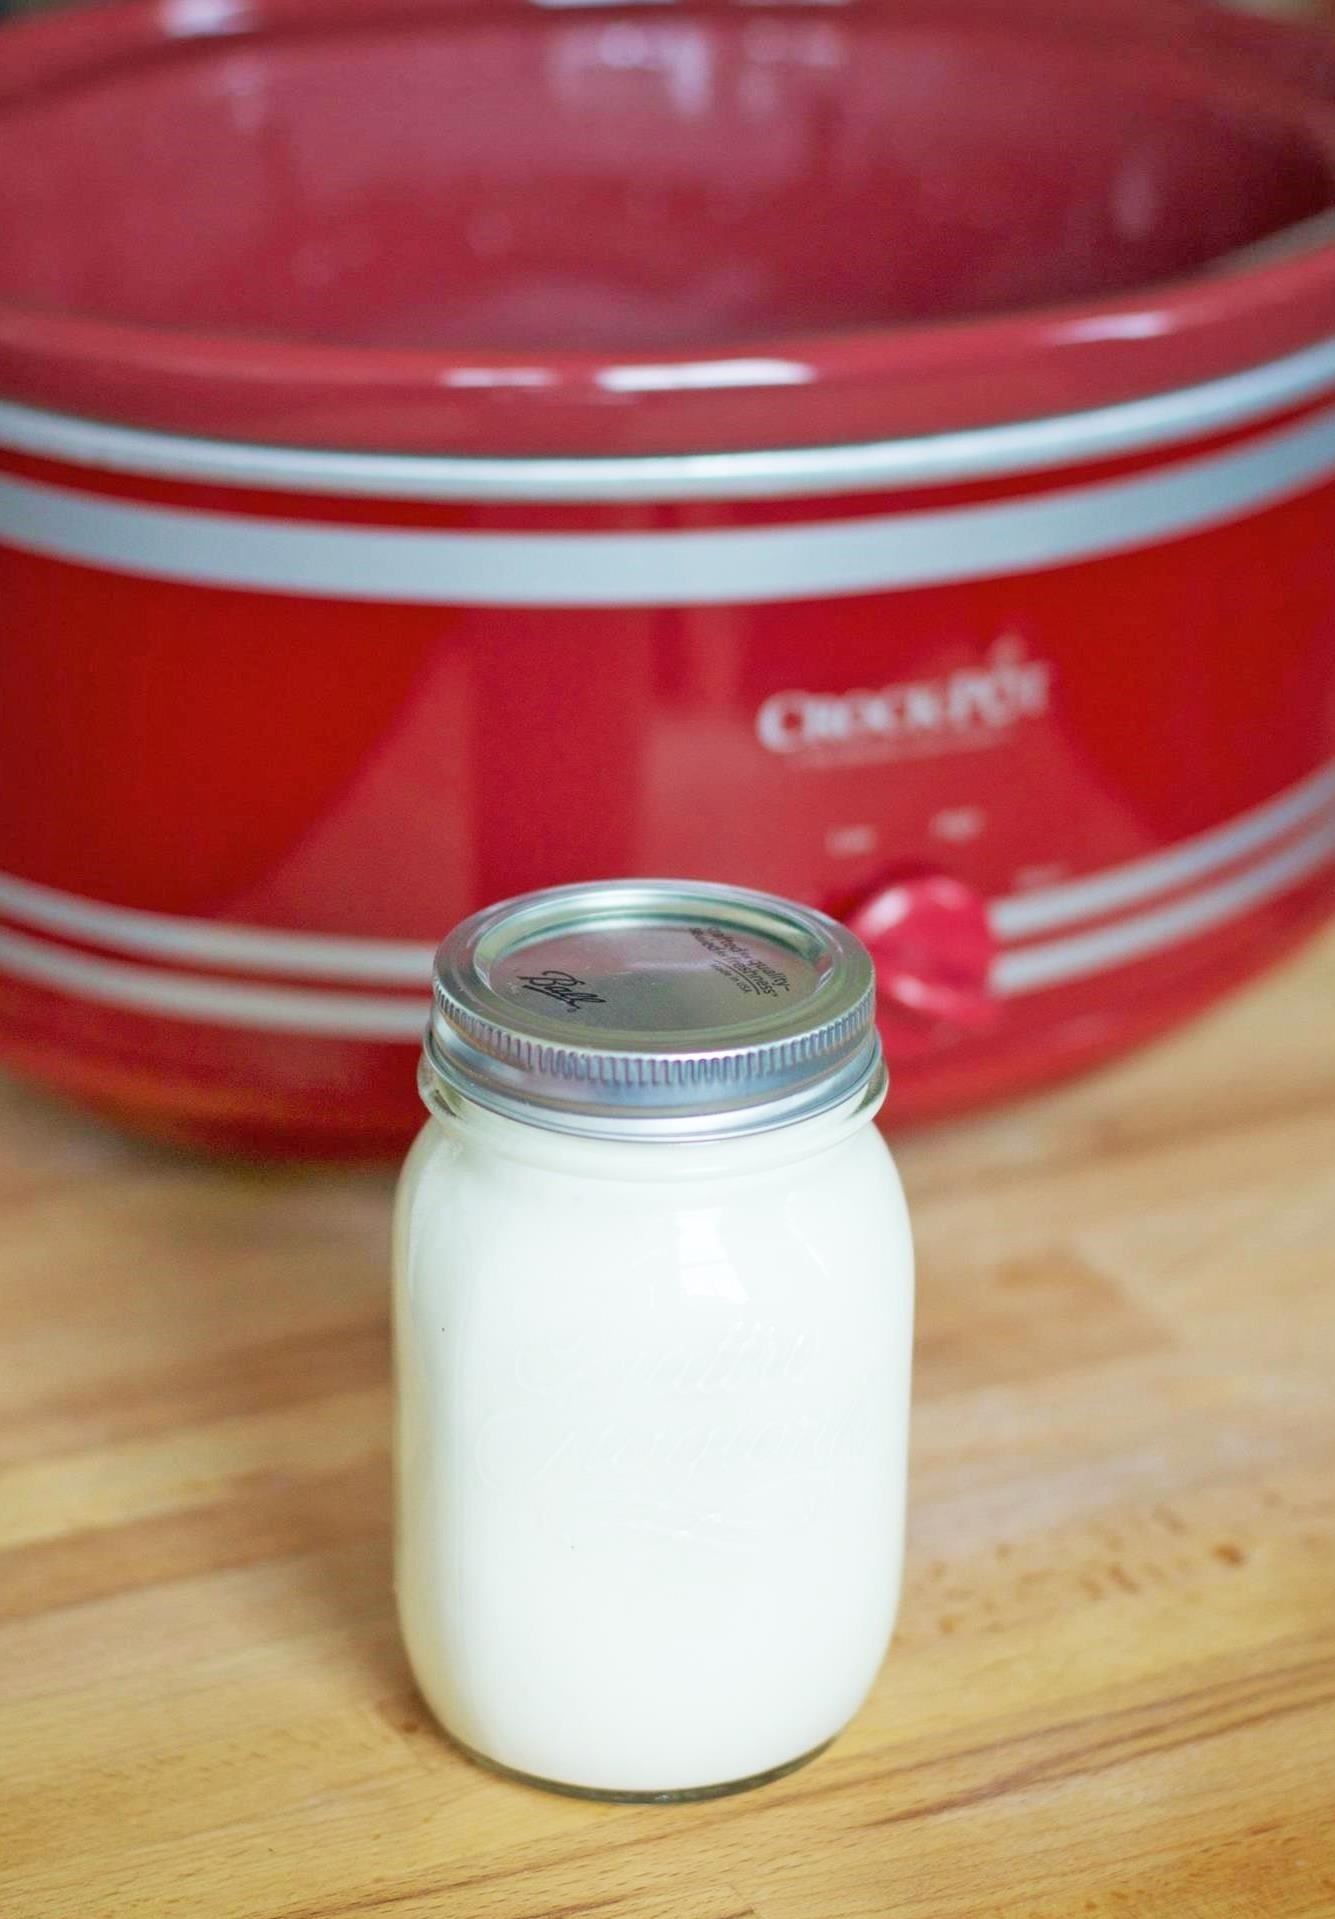 With This Slow Cooker Hack, You'll Never Have to Buy Yogurt Again